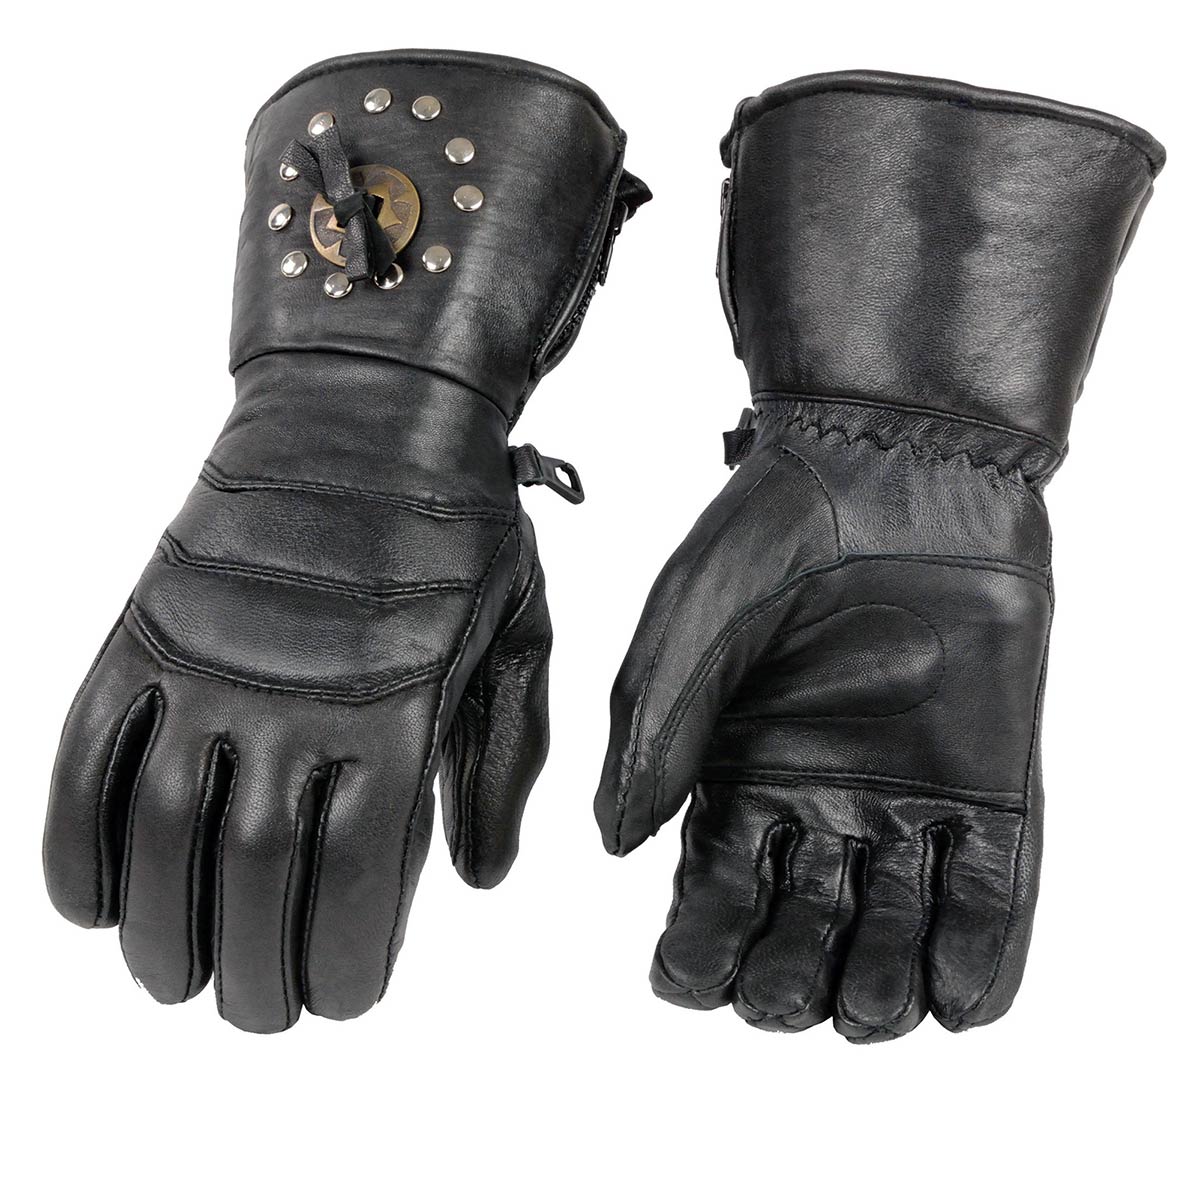 Milwaukee WORK GLOVES XXL LEATHER 11 STRONG - merXu - Negotiate prices!  Wholesale purchases!